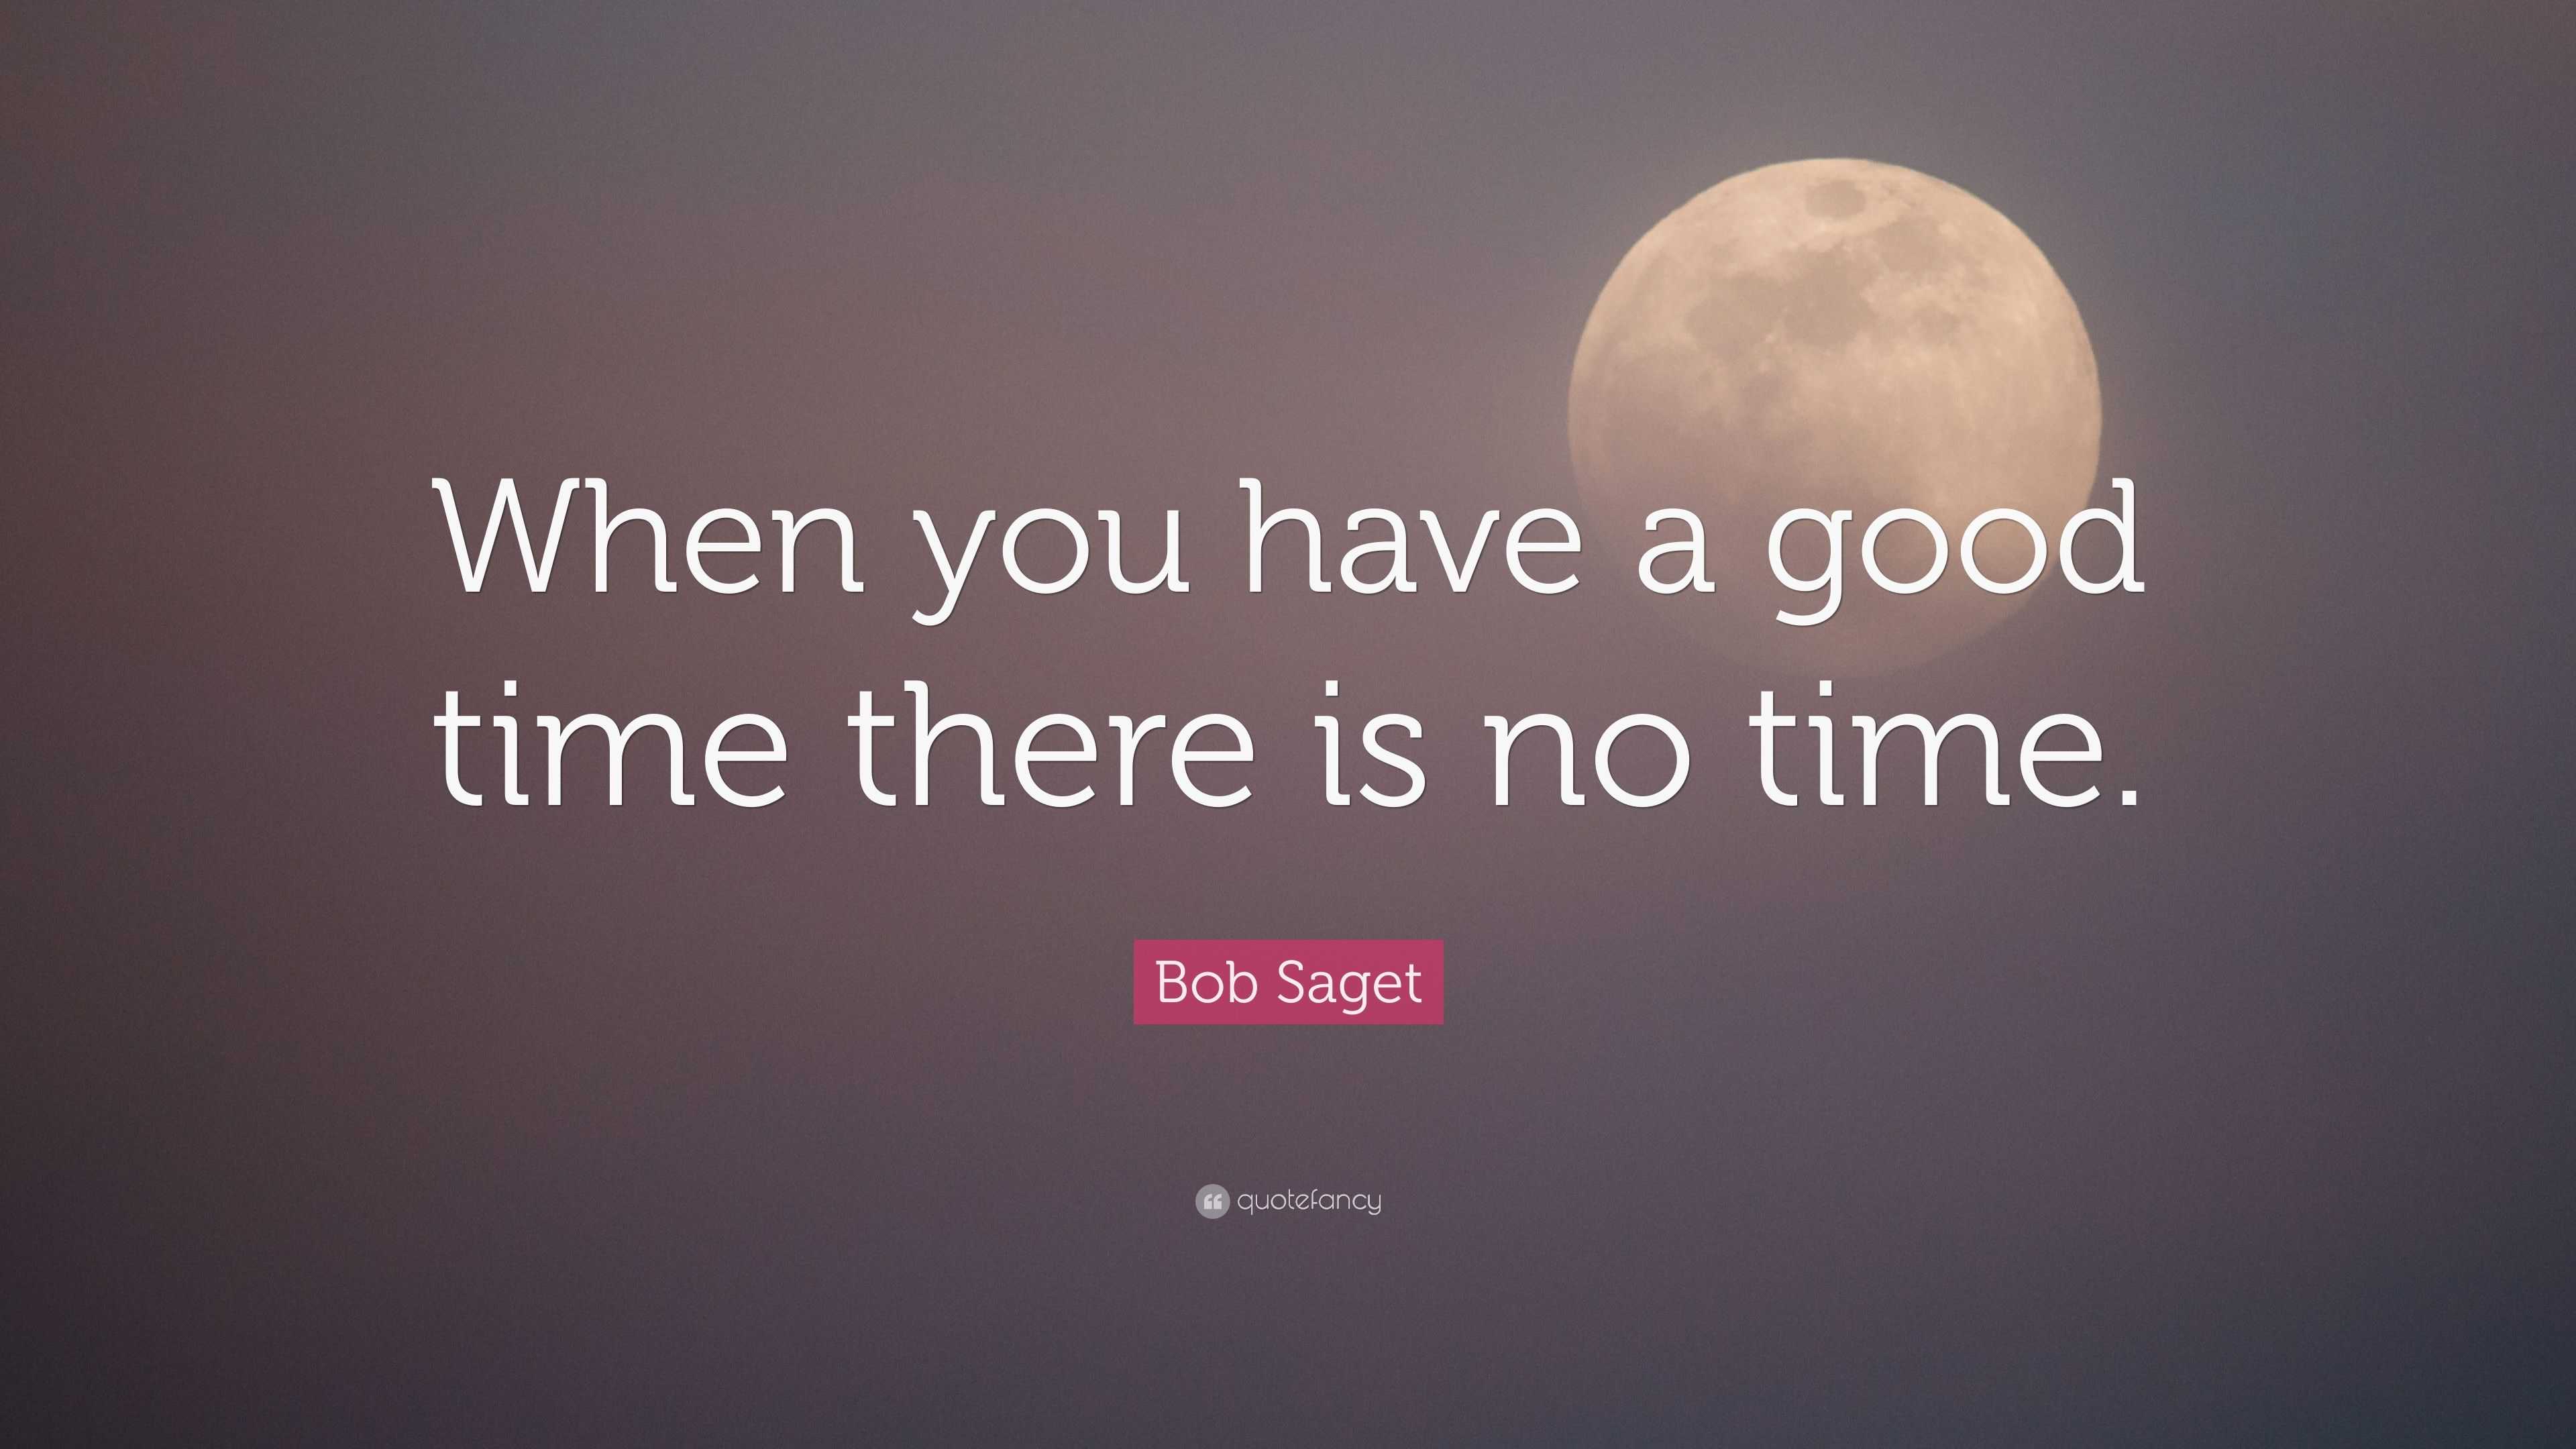 Bob Saget Quote: “When you have a time there time.”